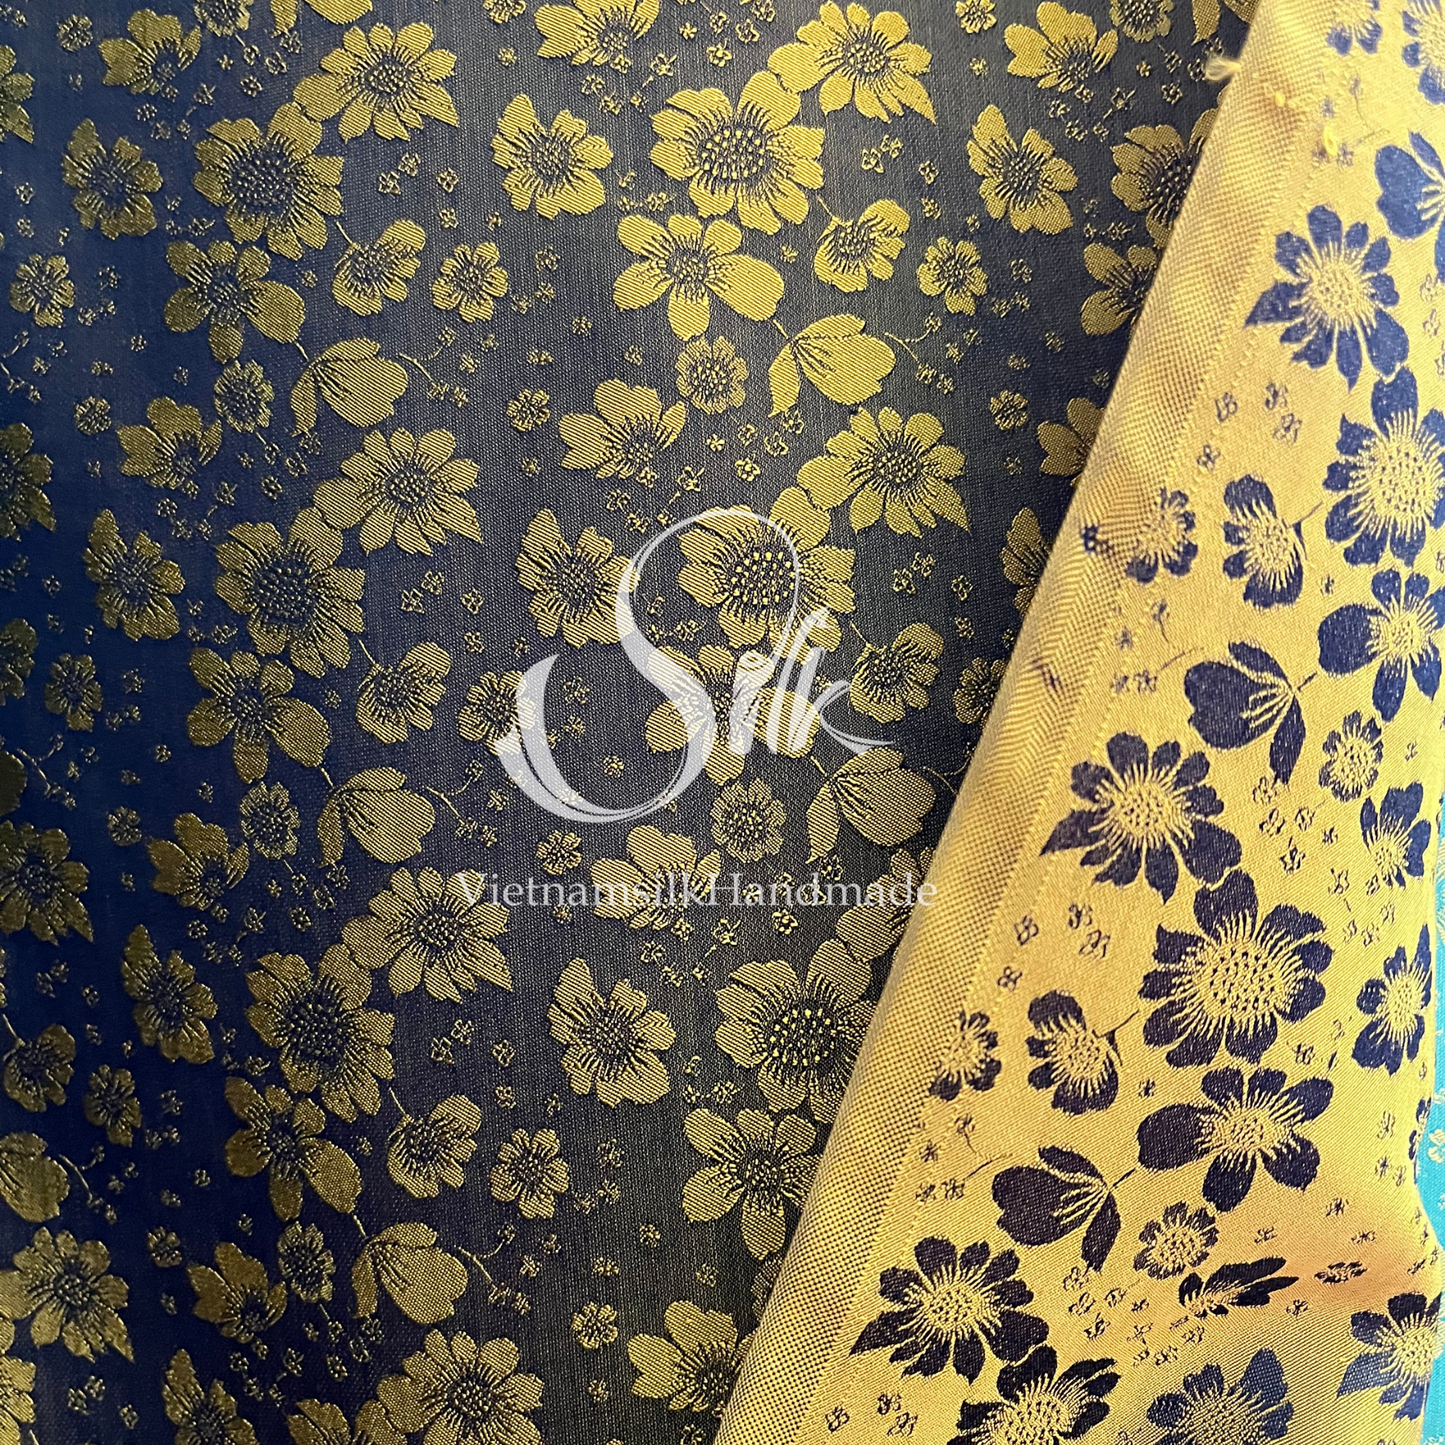 Black Navy Silk with Yellow Flowers - PURE MULBERRY SILK fabric by the yard -  Floral Silk -Luxury Silk - Natural silk - Handmade in VietNam